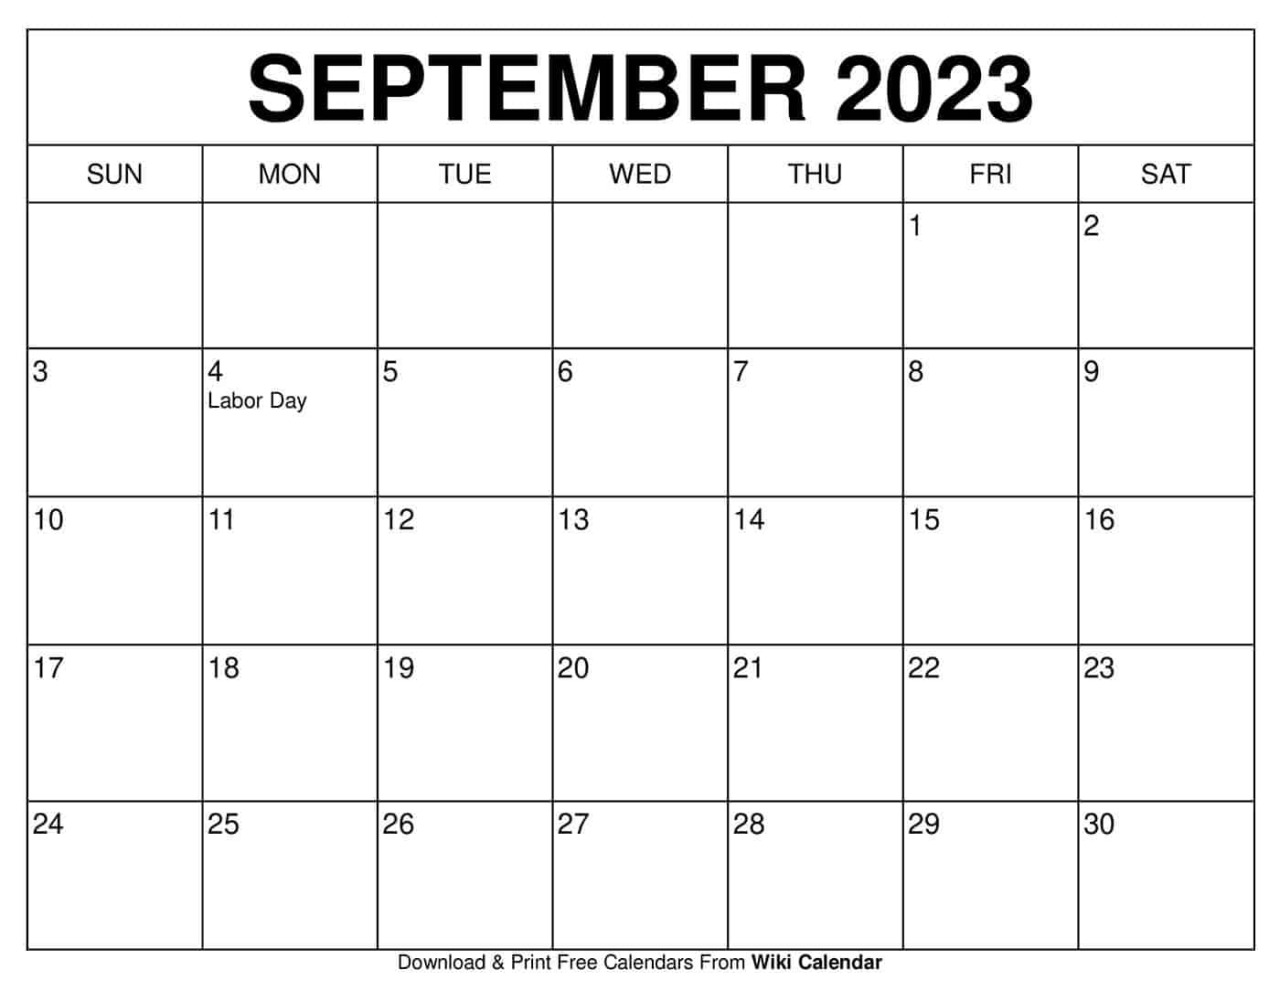 wiki-calendar-free-printable-2023-year-and-month-calendars